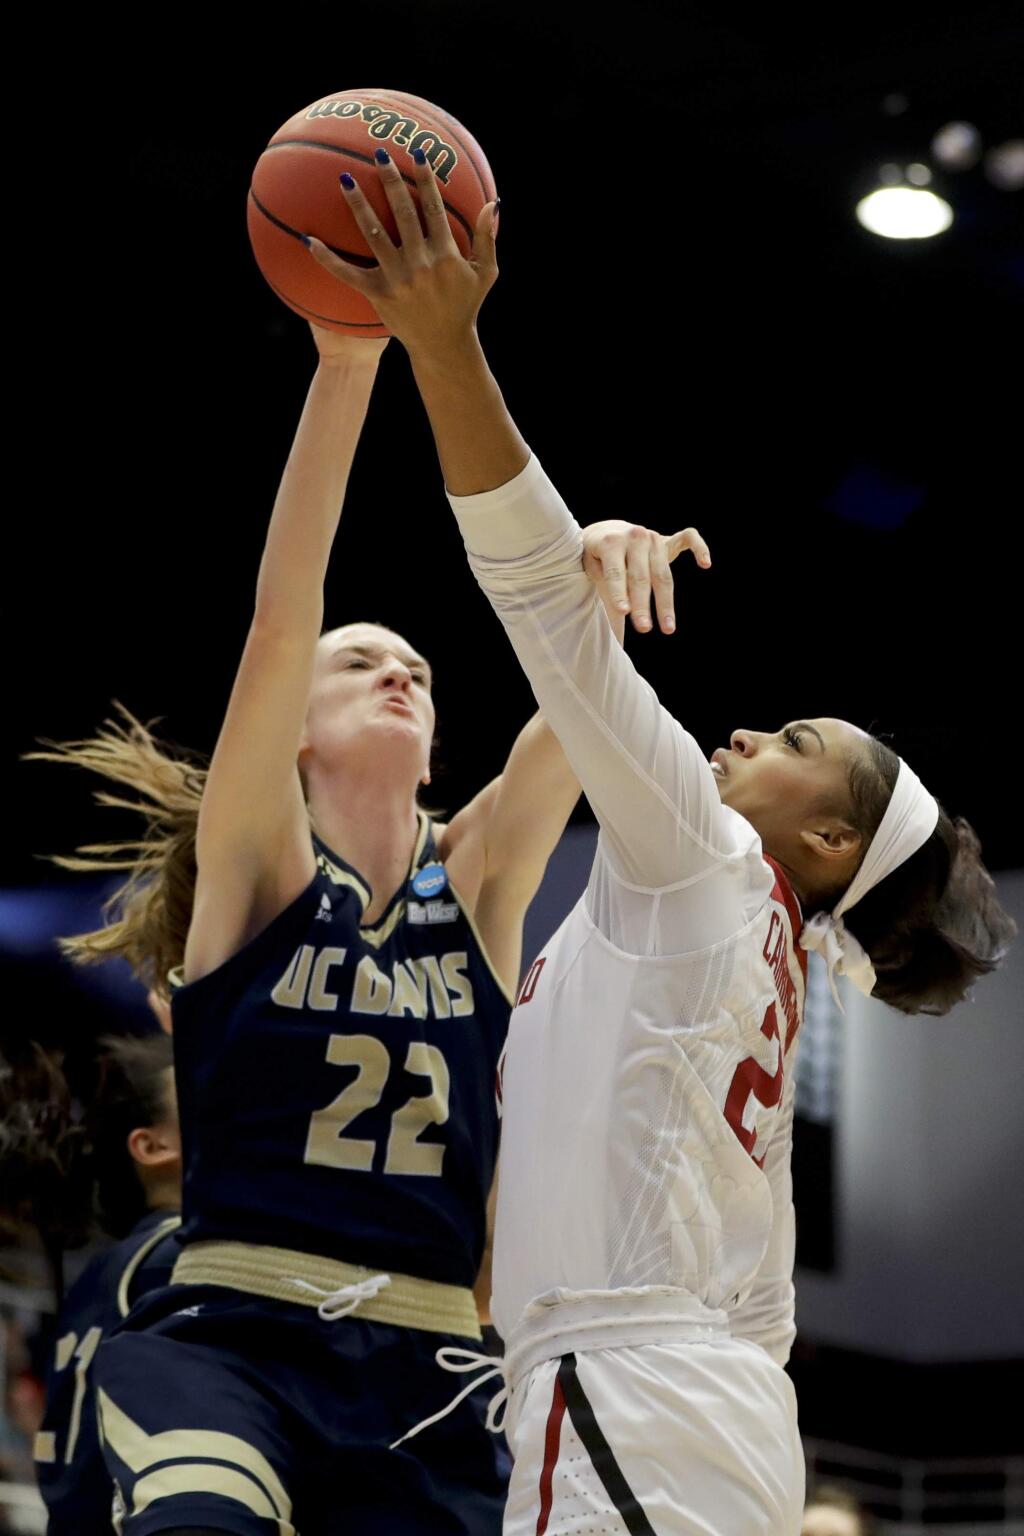 UC Davis forward Morgan Bertsch, let, blocks a shot by Stanford guard Kiana Williams during the first half of a first-round game in the NCAA women's college basketball tournament in Stanford, Calif. Saturday, March 23, 2019. (AP Photo/Chris Carlson)